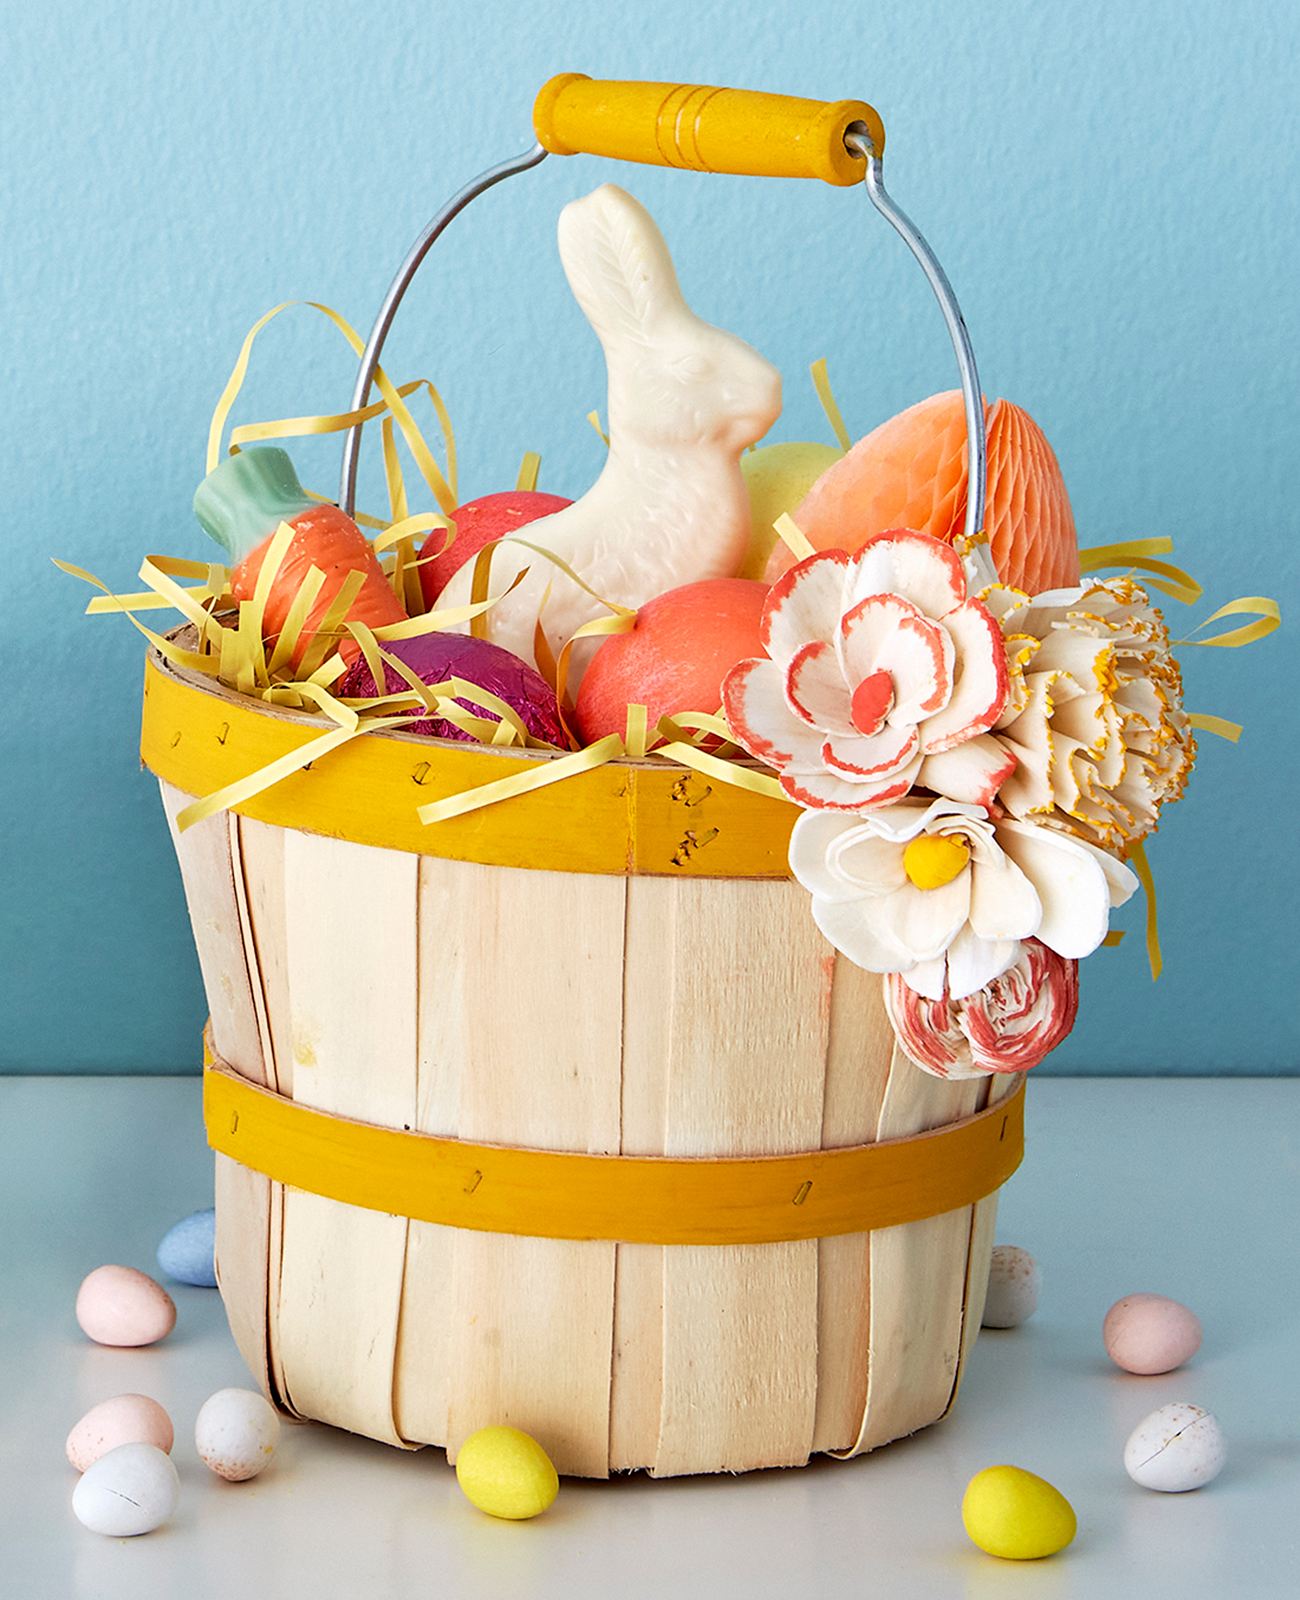 Half-peck basket blooming with painted wooden flowers